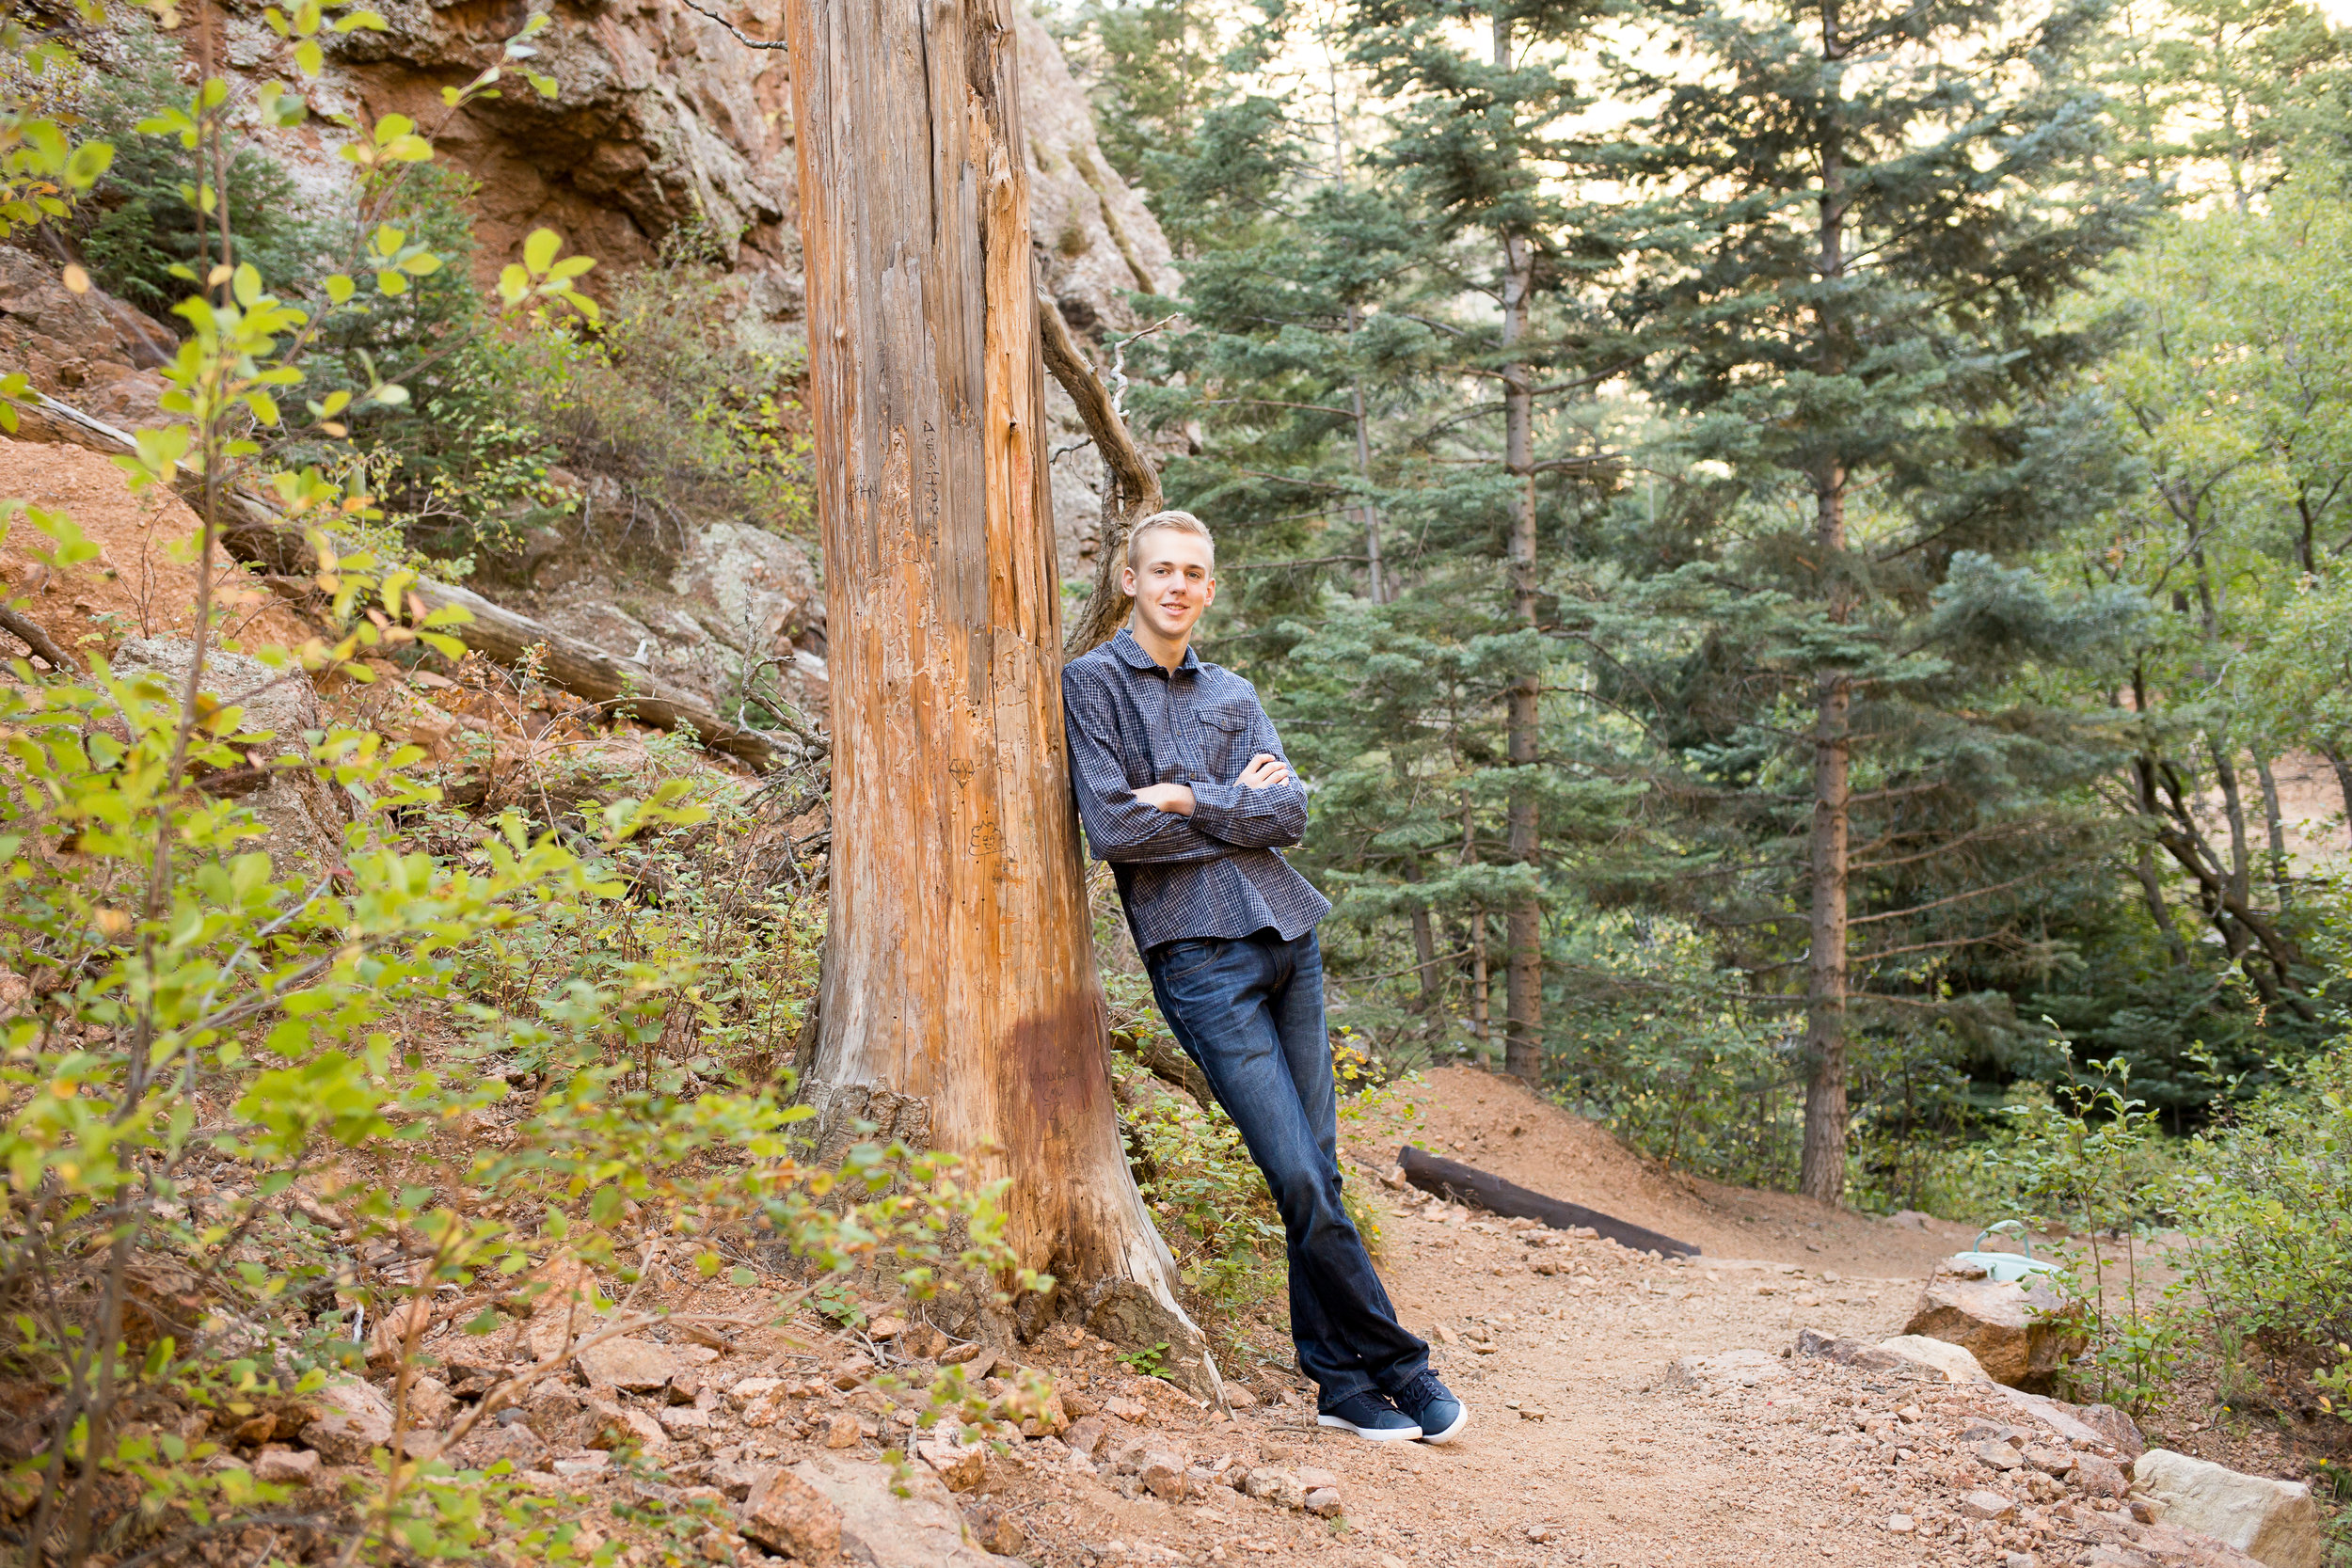 Colorado Springs Senior Photography | Widefield High School senior session in Cheyenne Canyon | Stacy Carosa Photography | Colorado Springs Senior Photographer